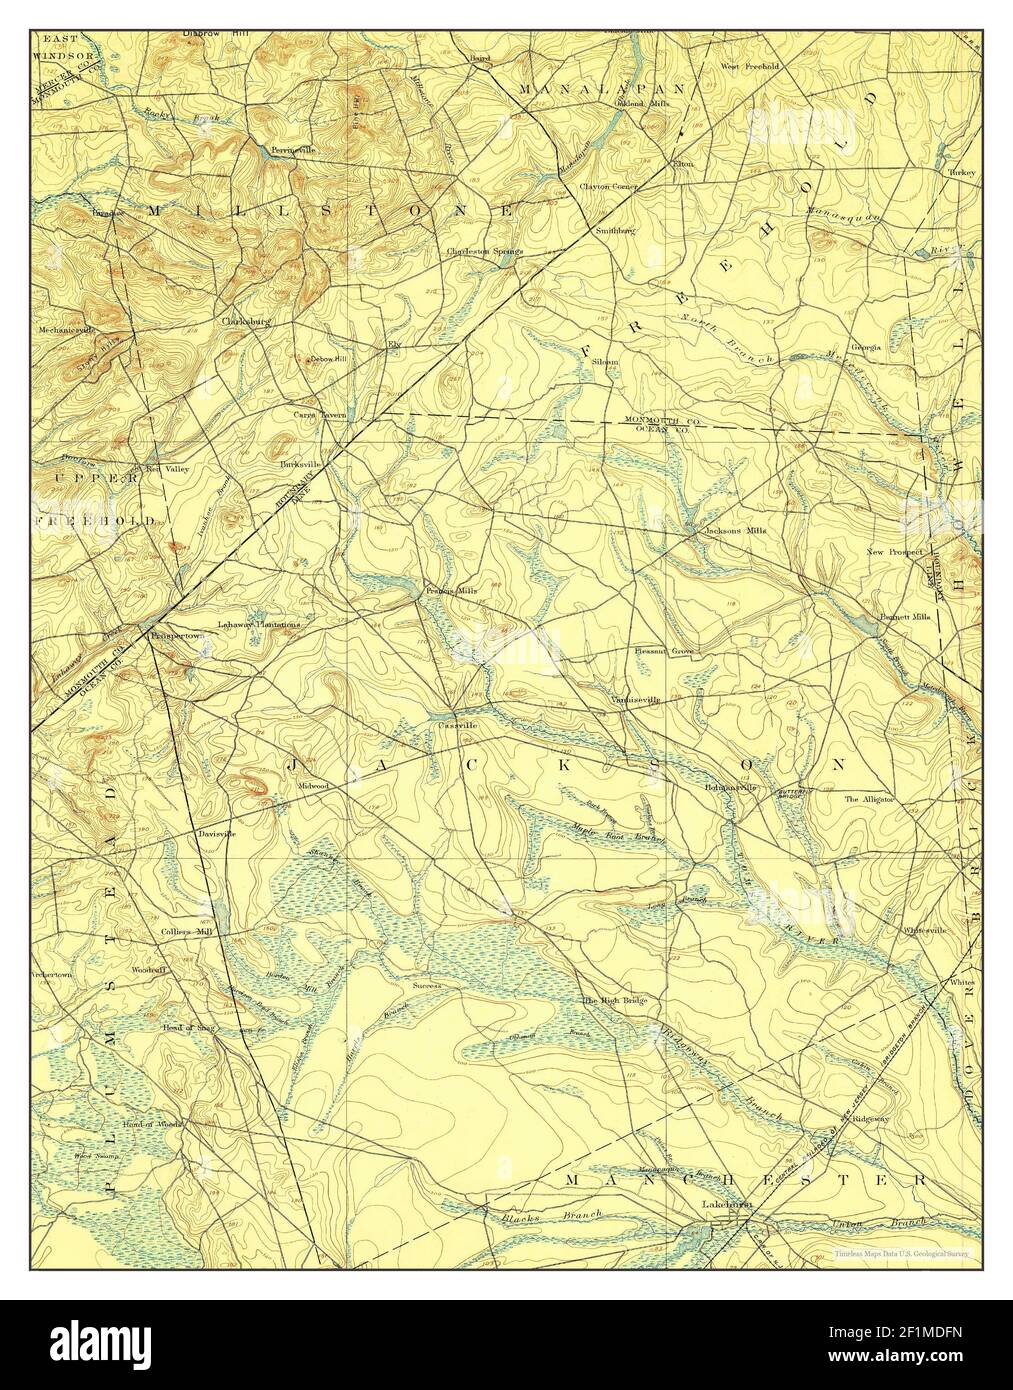 Cassville, New Jersey, map 1900, 1:62500, United States of America by Timeless Maps, data U.S. Geological Survey Stock Photo